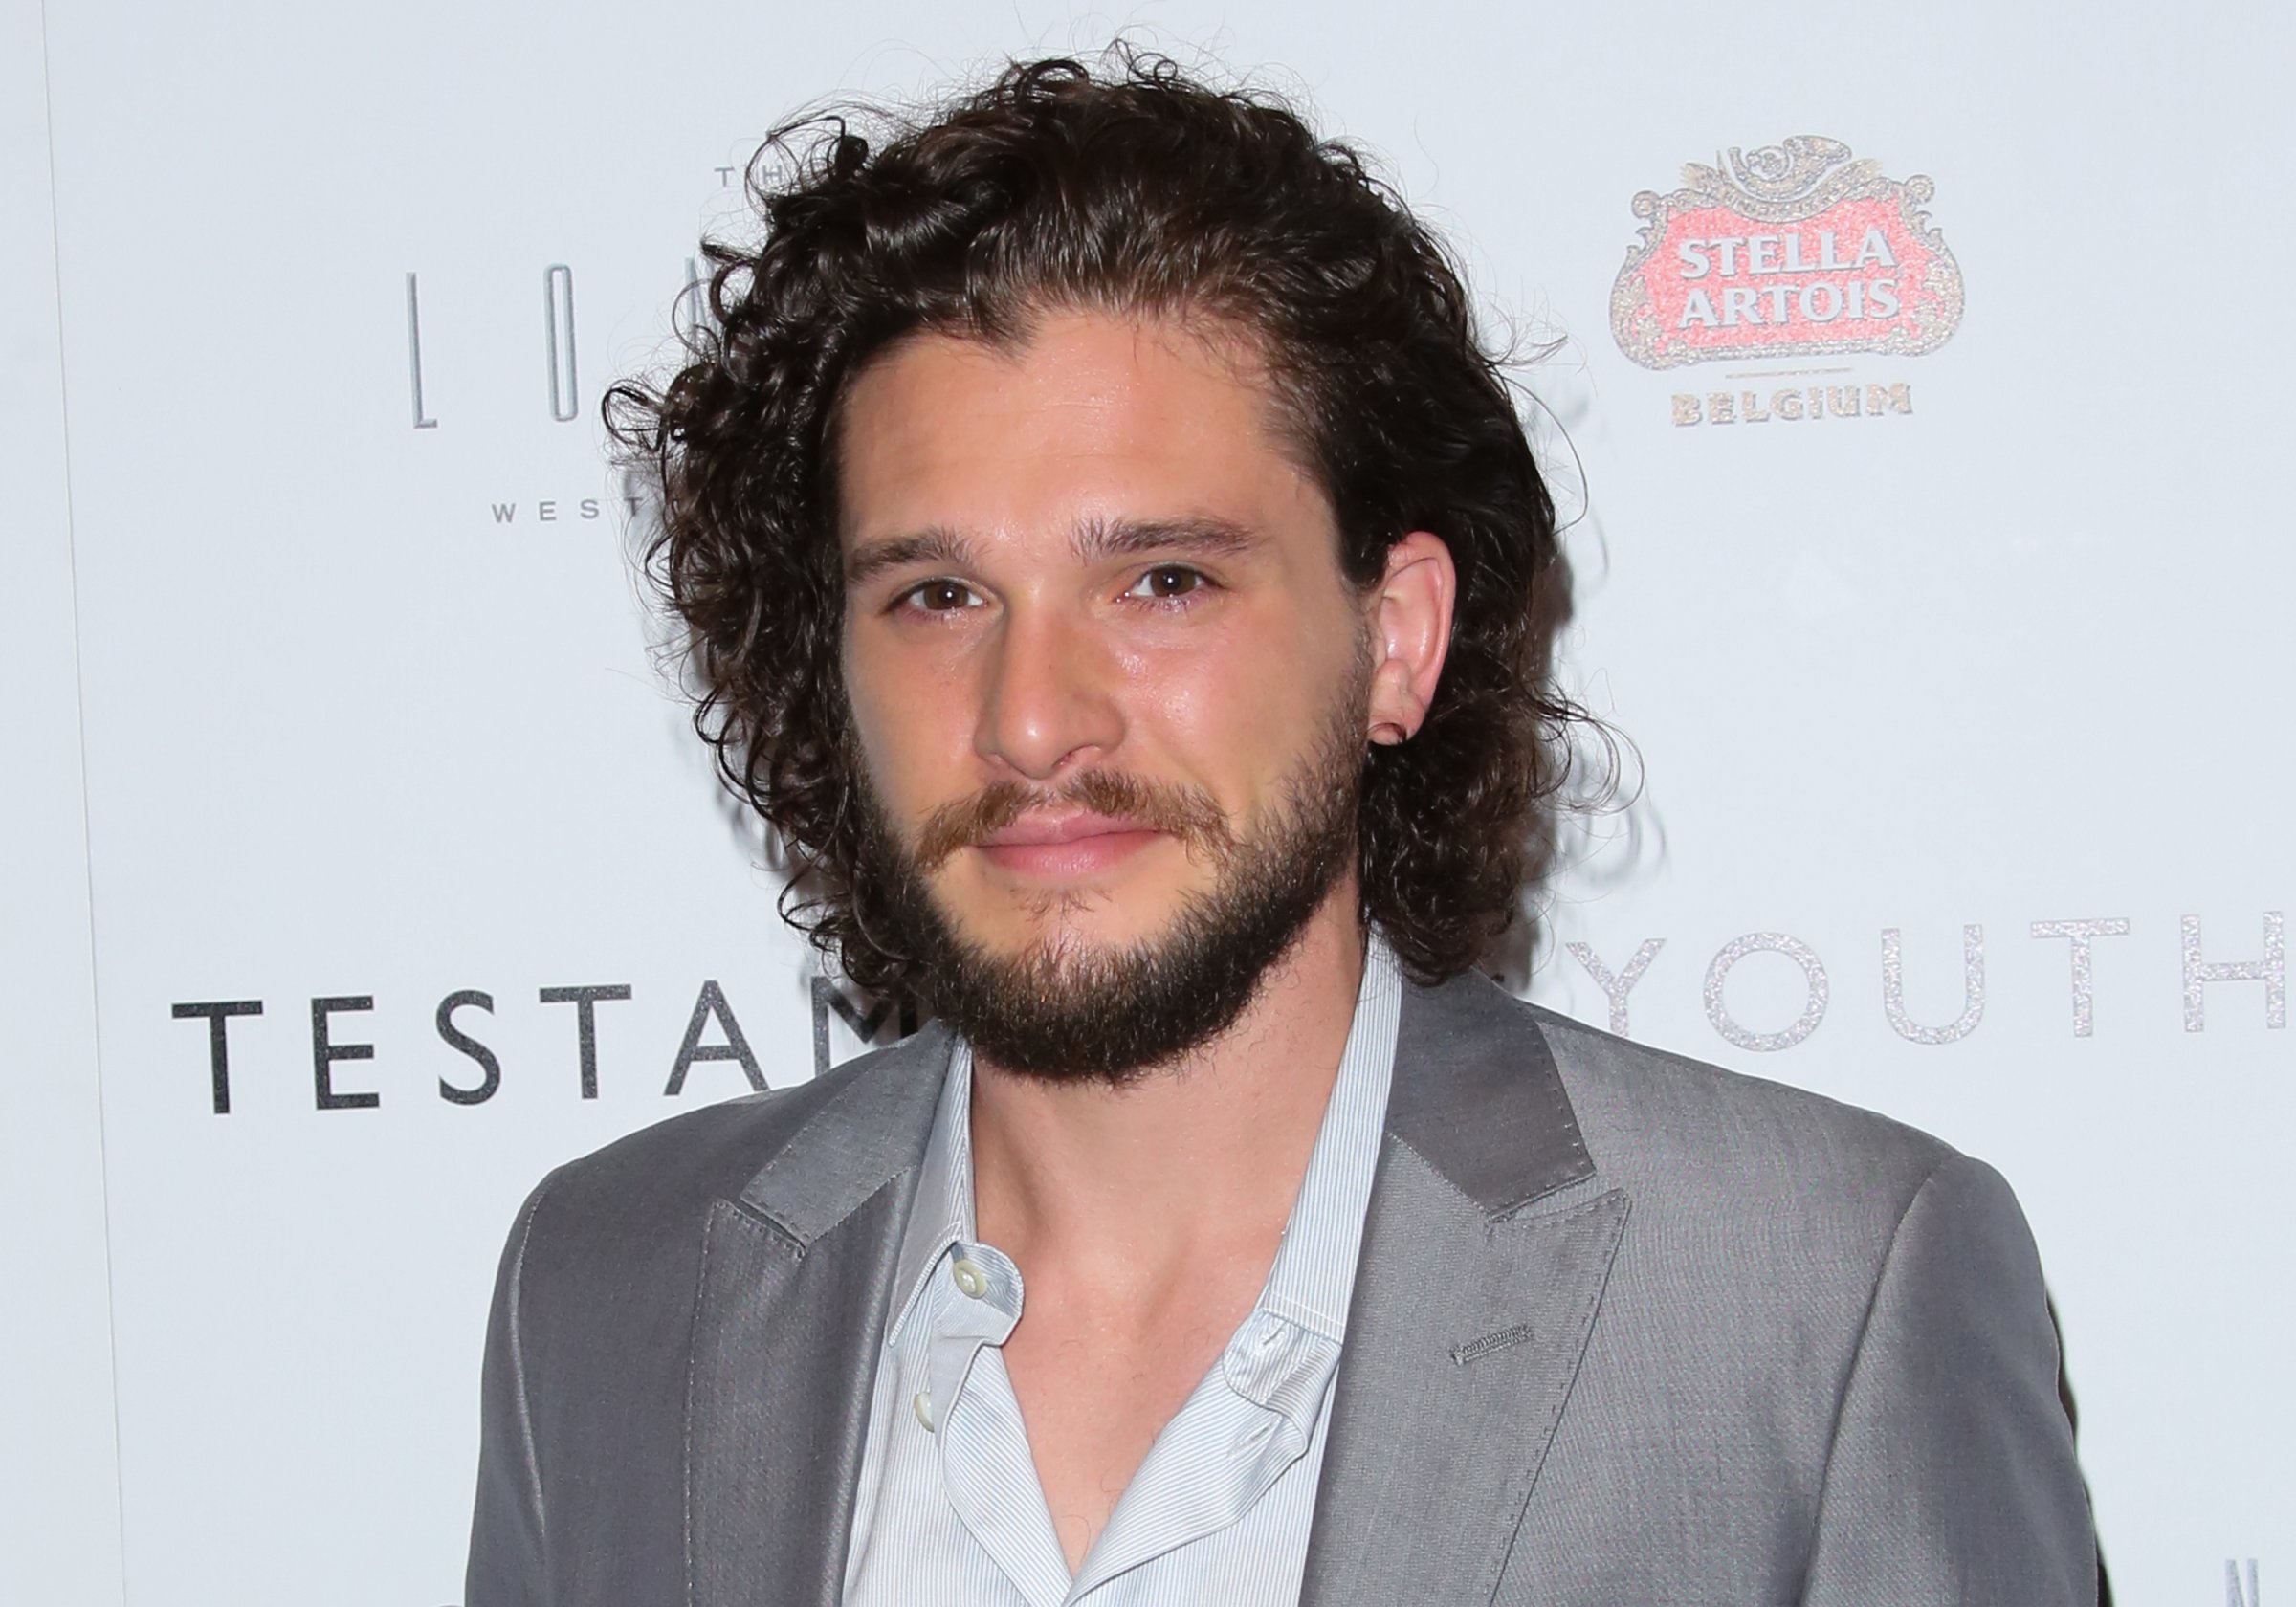 Kit Harington attends the premiere of "Testament Of Youth" on May 29, 2015 in West Hollywood, California.